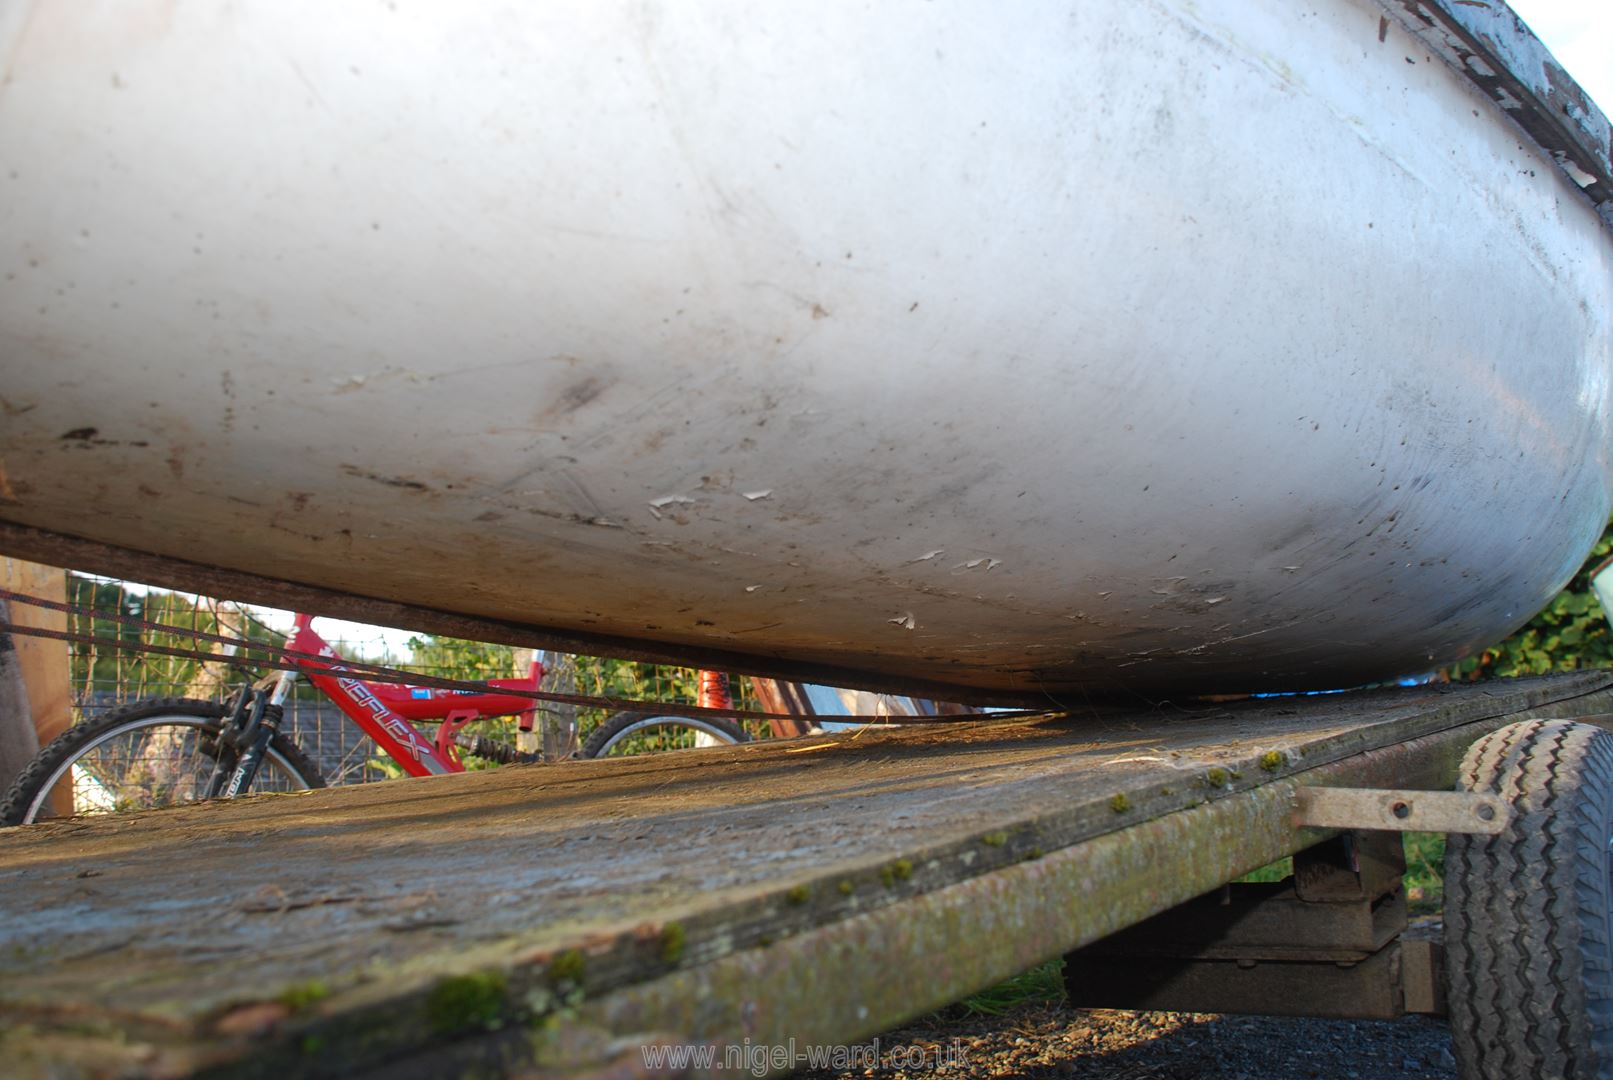 A glass fibre hulled sailing dinghy for restoration with 17' 2" high aluminium mast, fittings, - Image 8 of 14